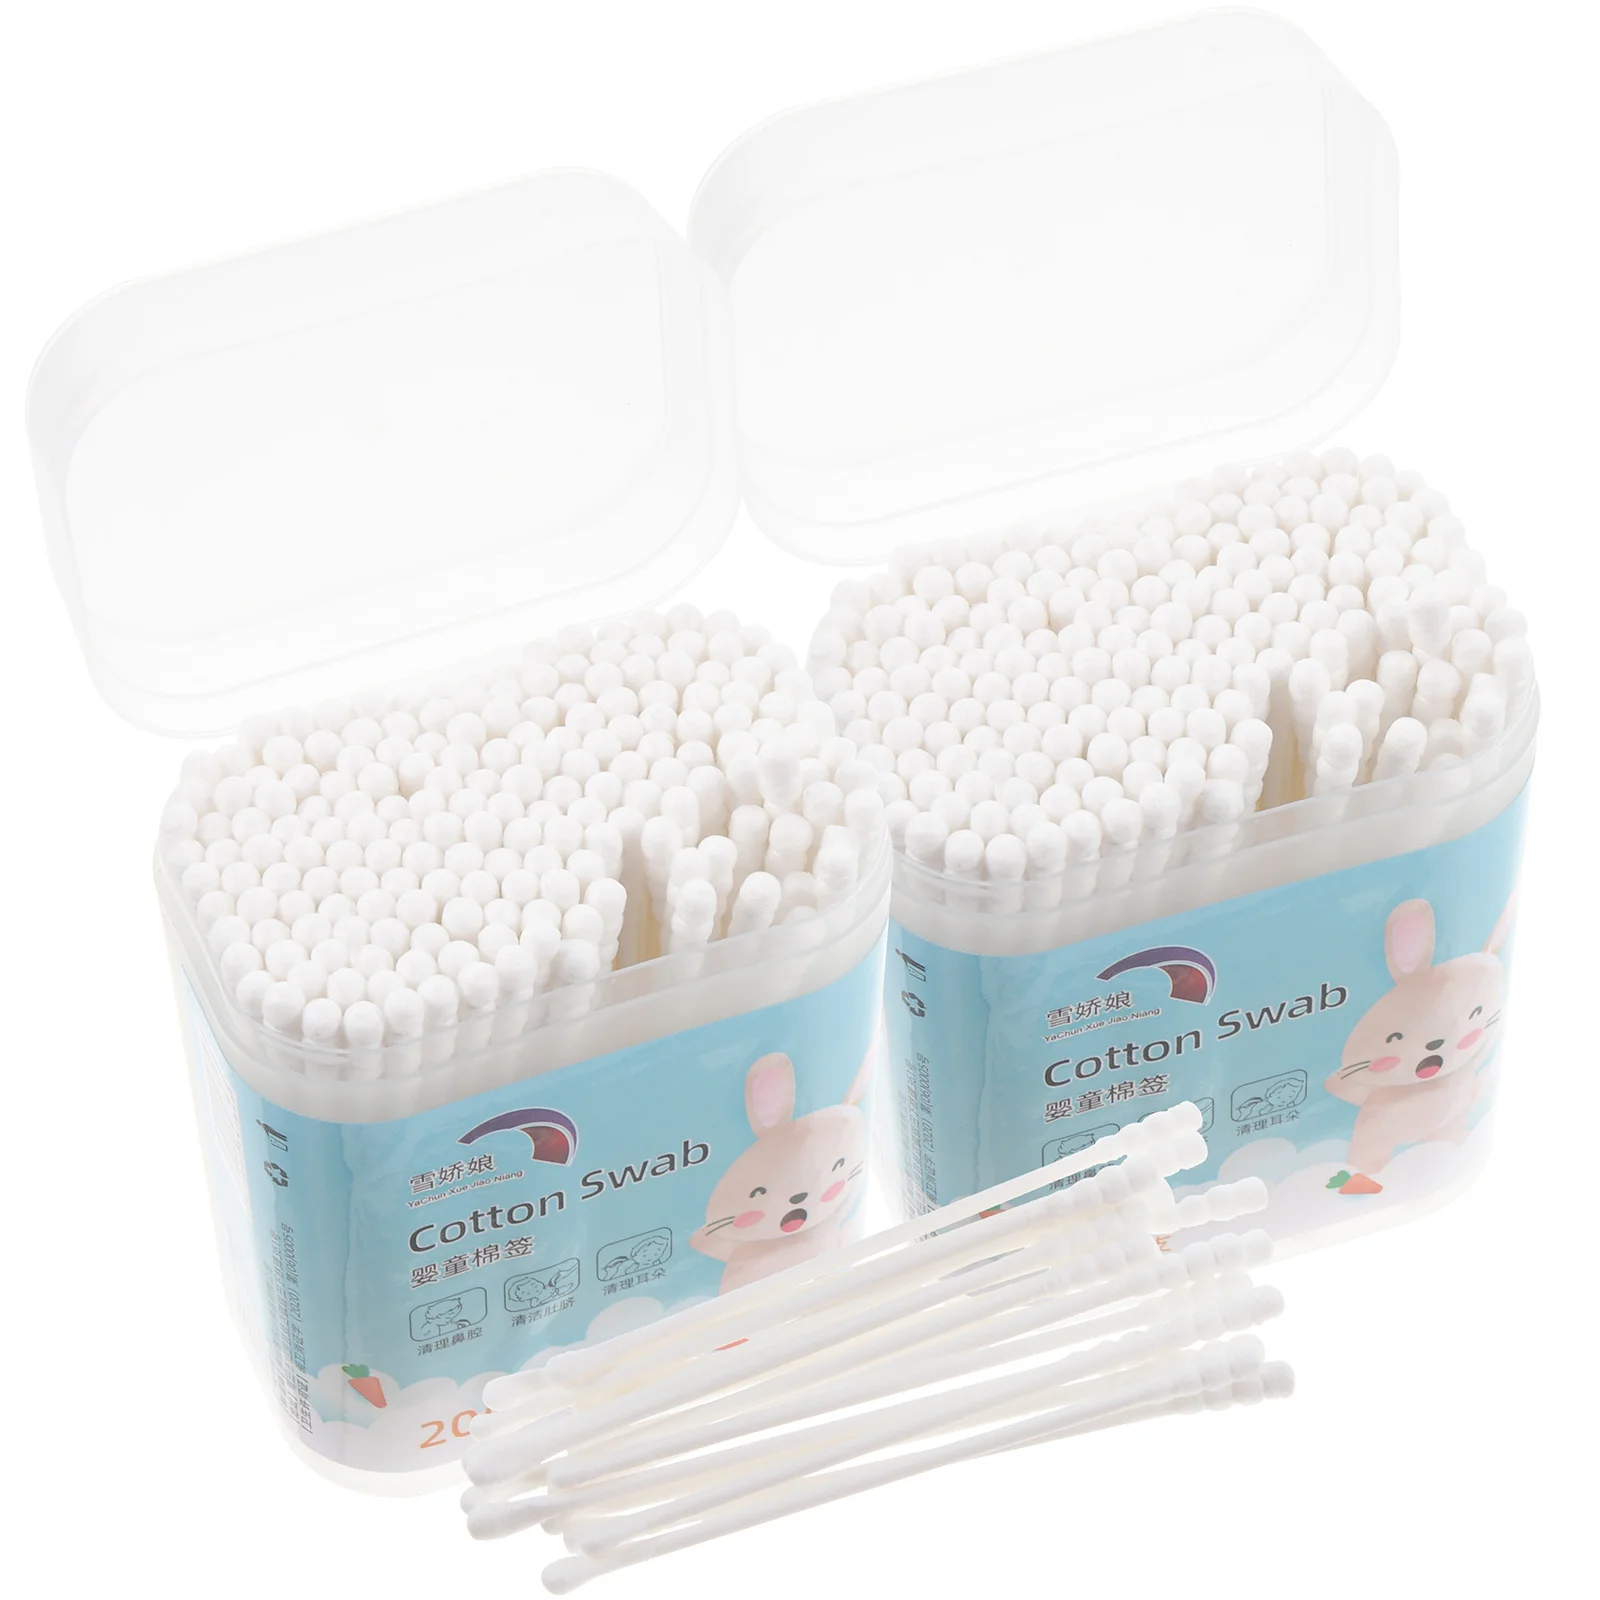 

400PCS/2 Boxes Infant Nose Swabs Buds Safety Ear Baby Care Buds Swabs Infant Cleaning Sticks